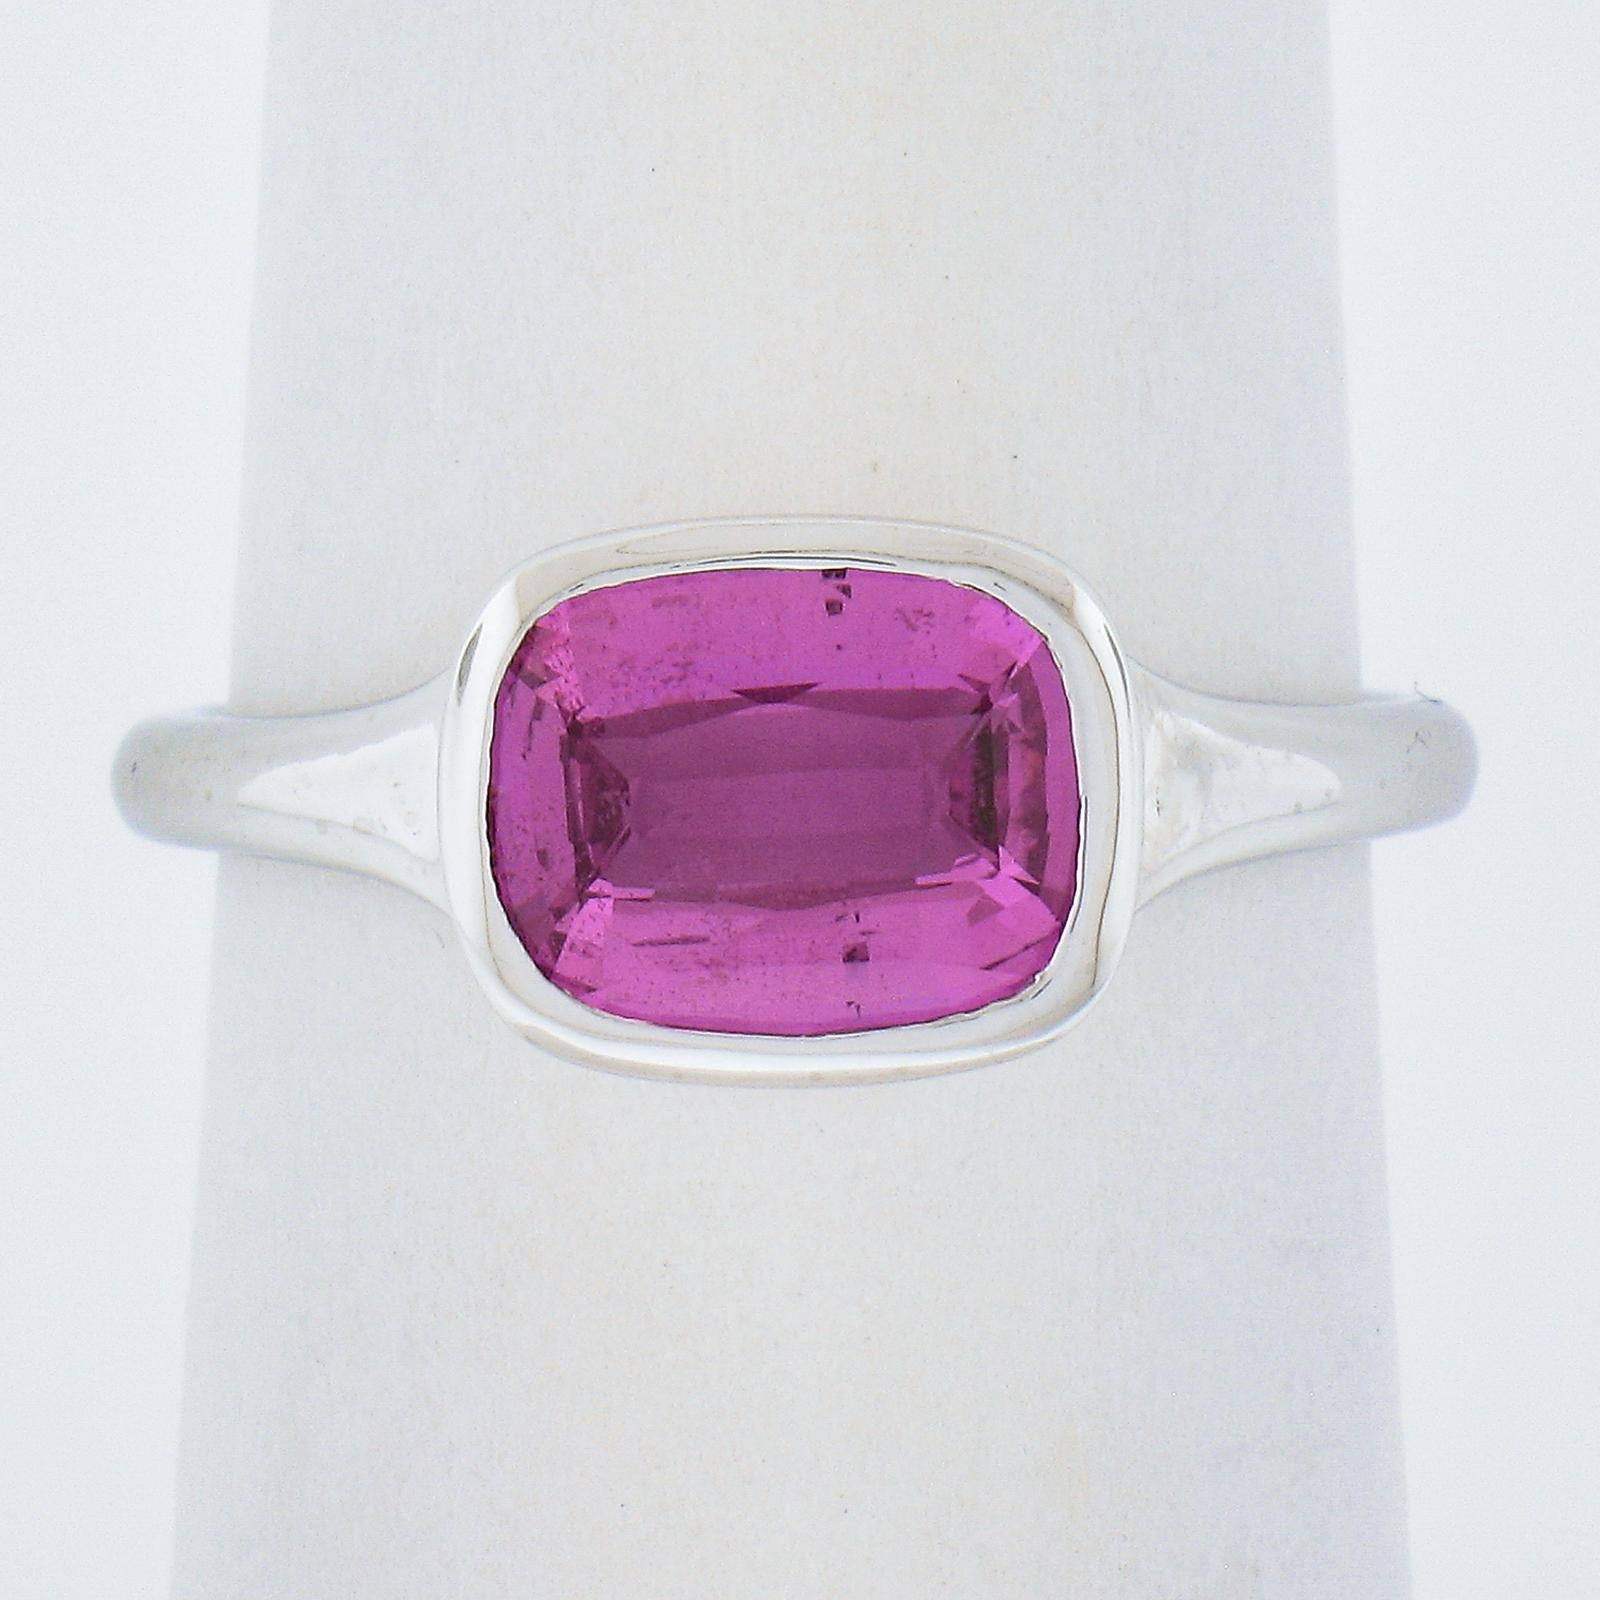 --Stone(s):--
(1) Natural Genuine Sapphire - Cushion Brilliant Cut - Bezel Set - Vivid Purplish Pink Color - 2.12ct (exact - certified)
** See Certification Details Below for Complete Info **
Total Carat Weight:	2.12(exact)

Material: Solid .900+